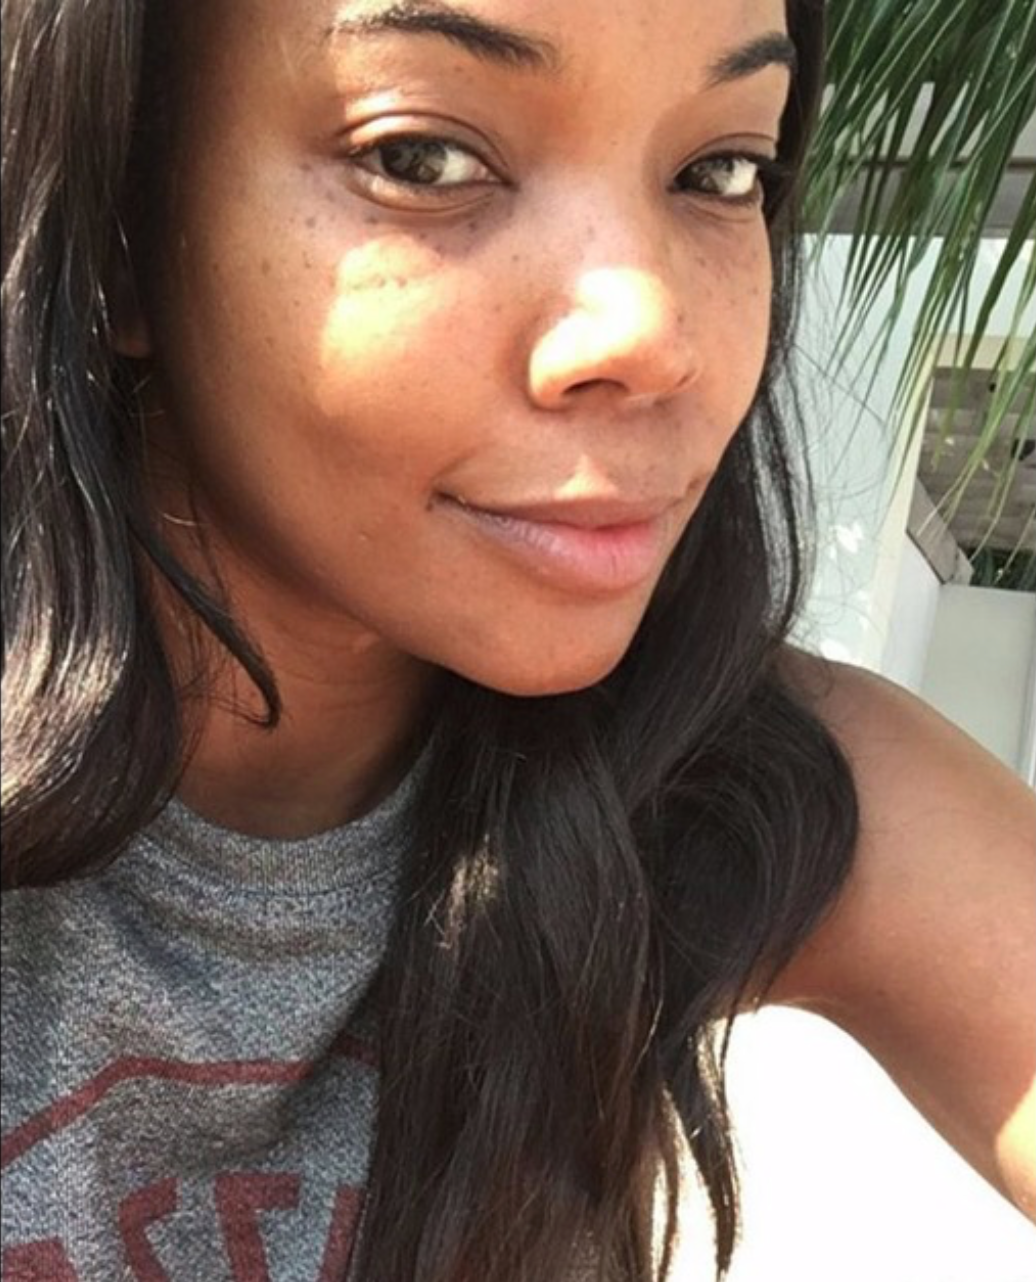 Gabrielle Union, Tamron Hall and More Join Alicia Keys' No Makeup Movement
